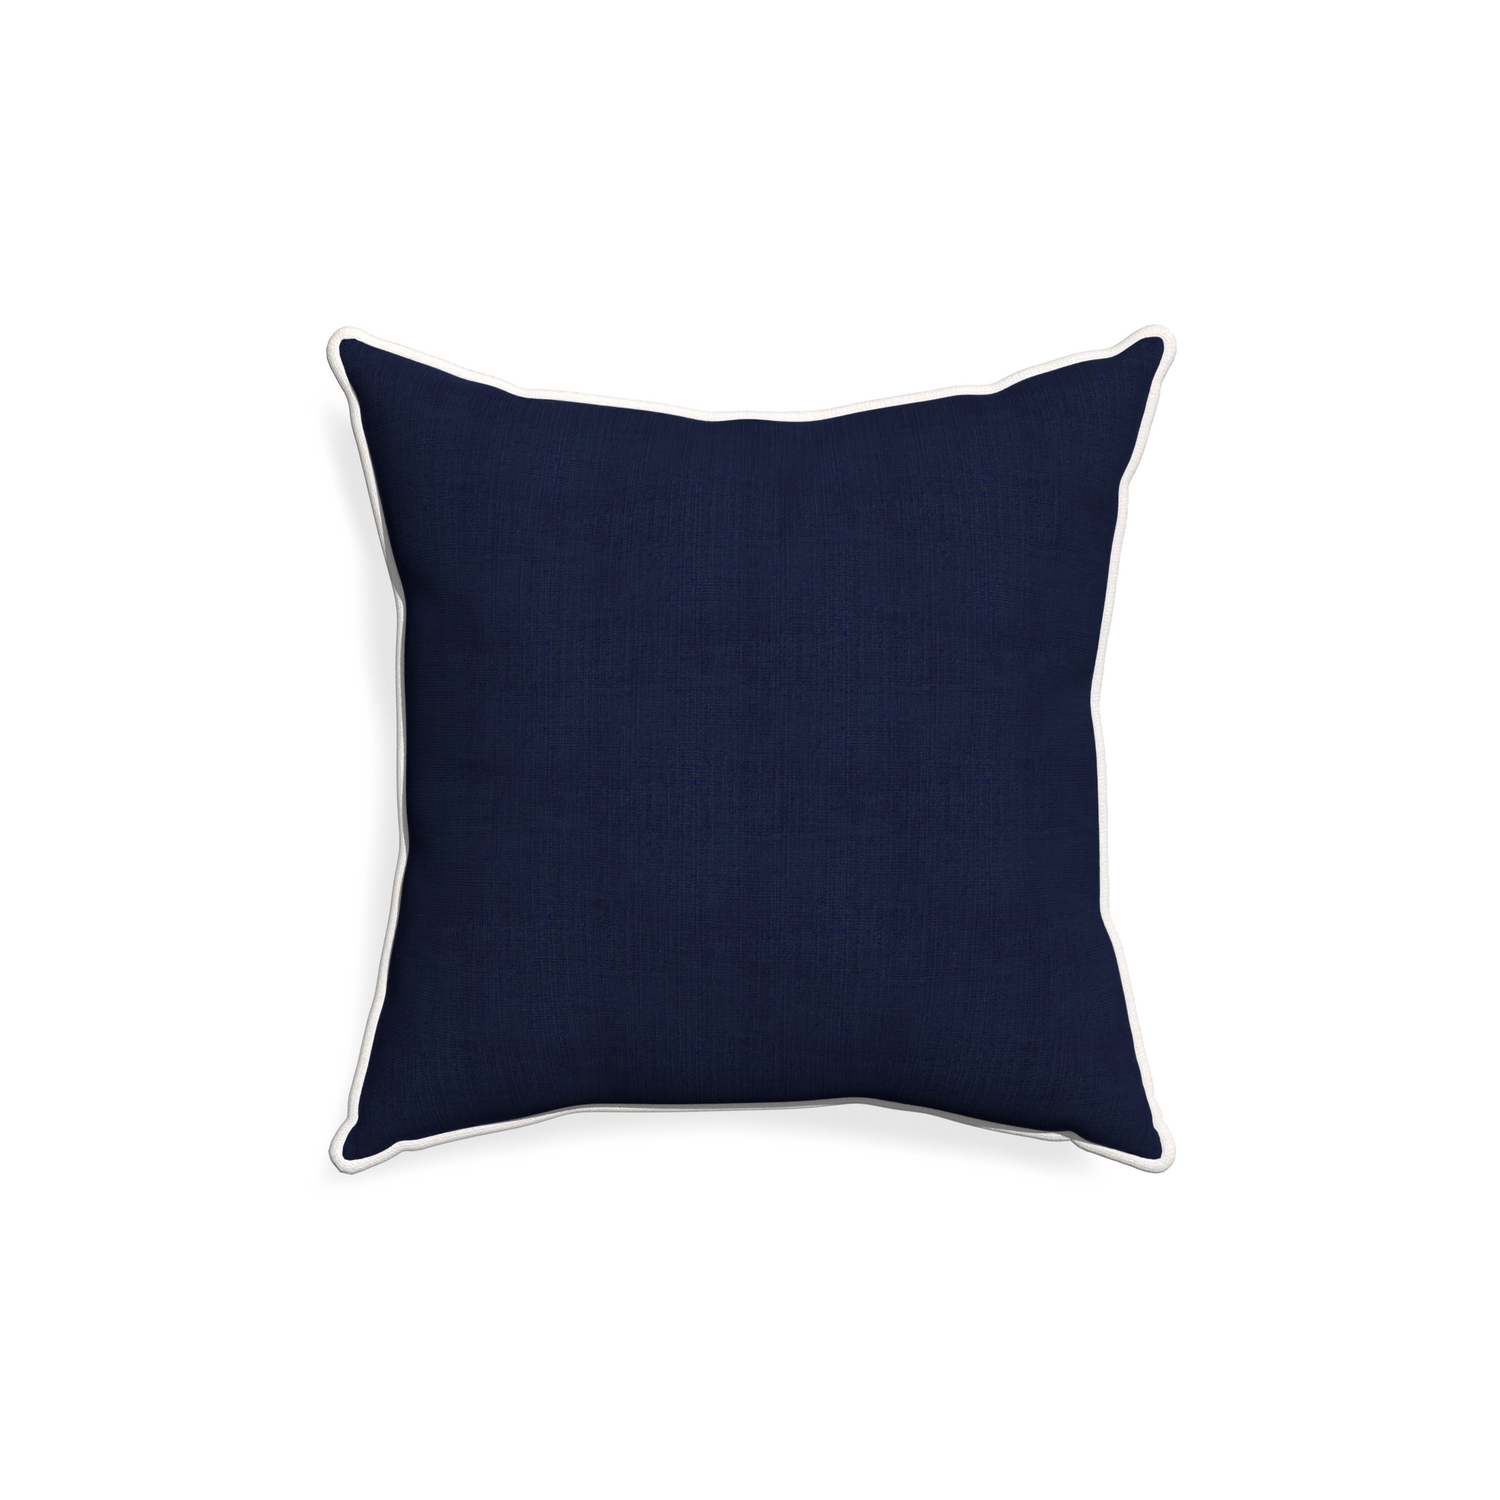 18-square midnight custom navy bluepillow with snow piping on white background